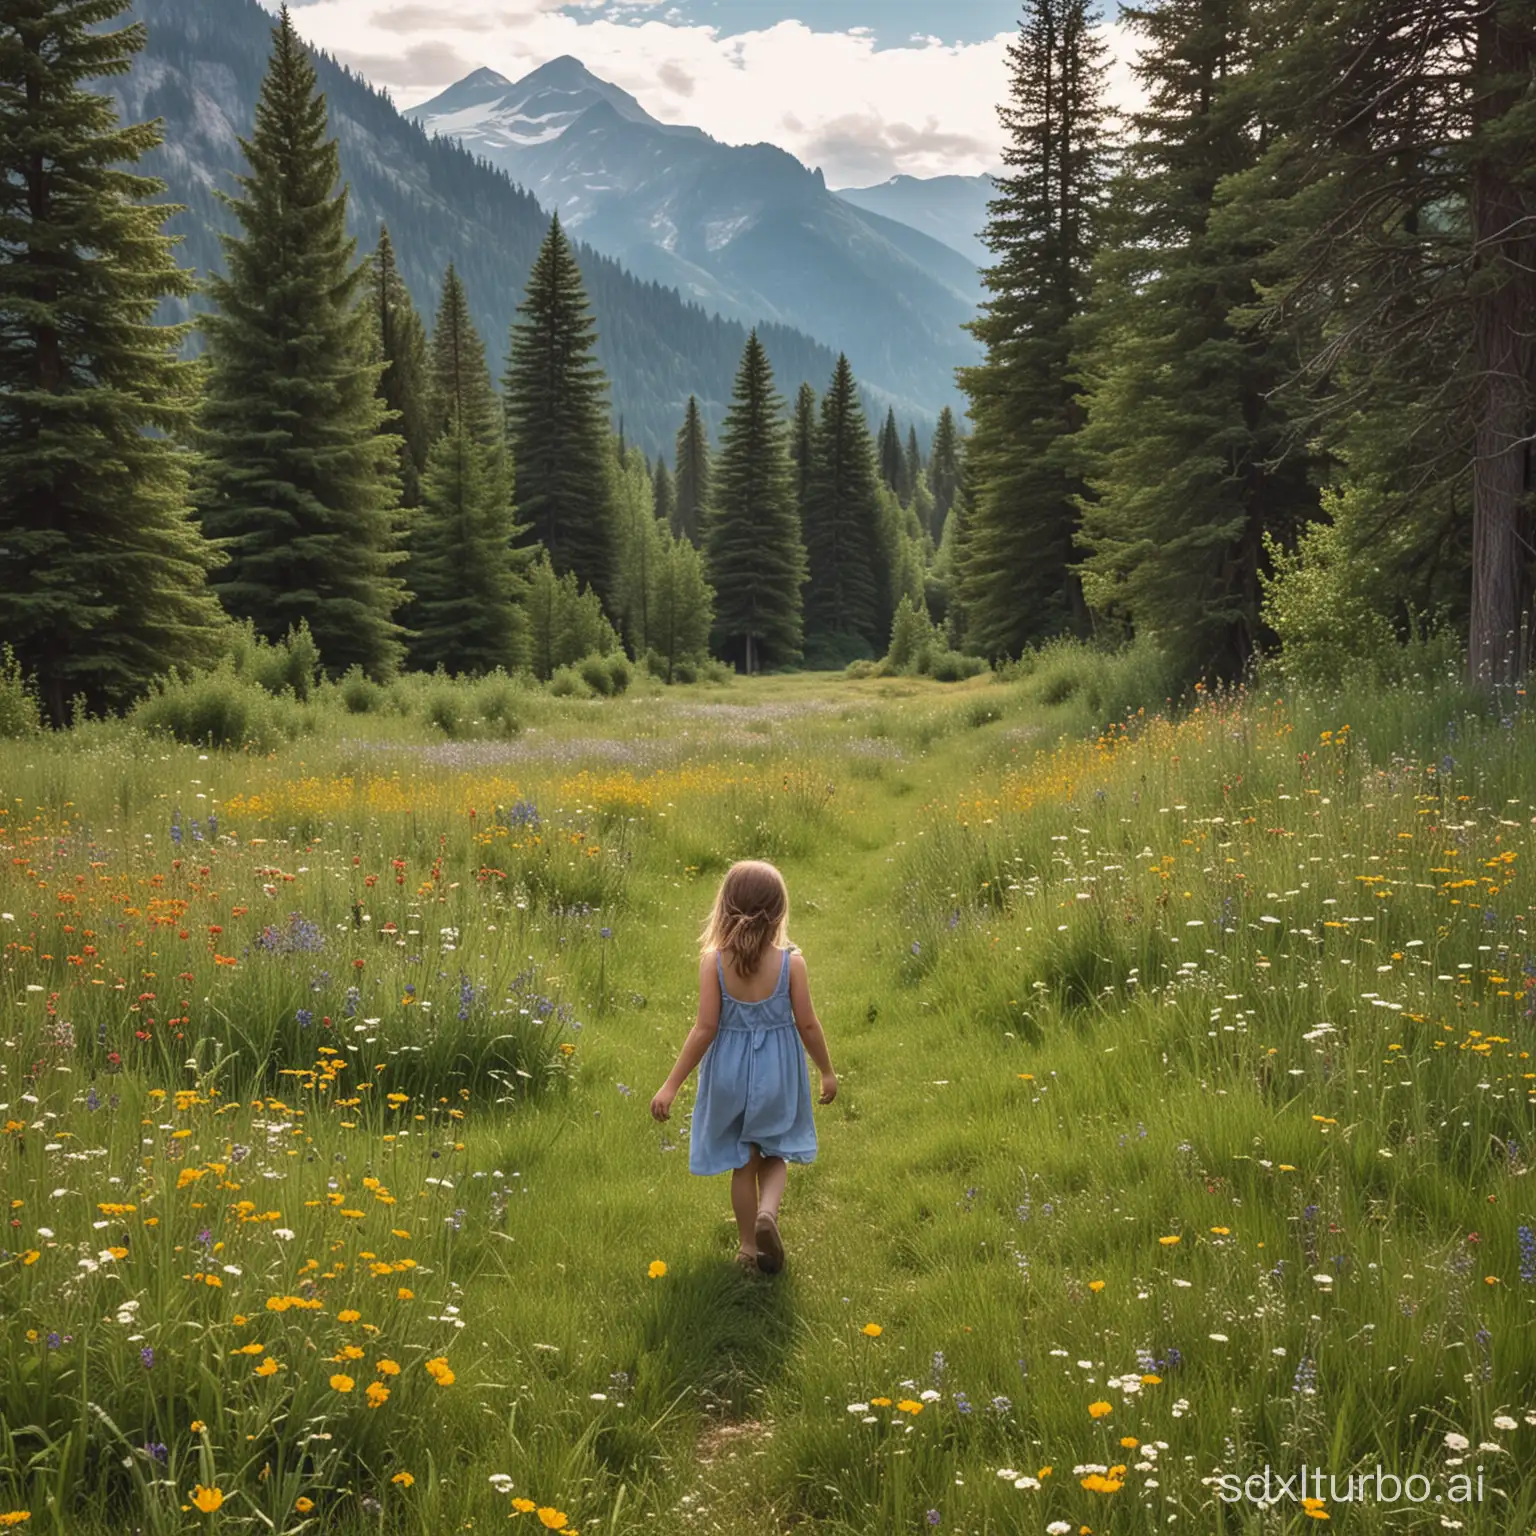 The pretty little girl walks on the grass, surrounded by wildflowers, with mountains in the distance and big trees behind.